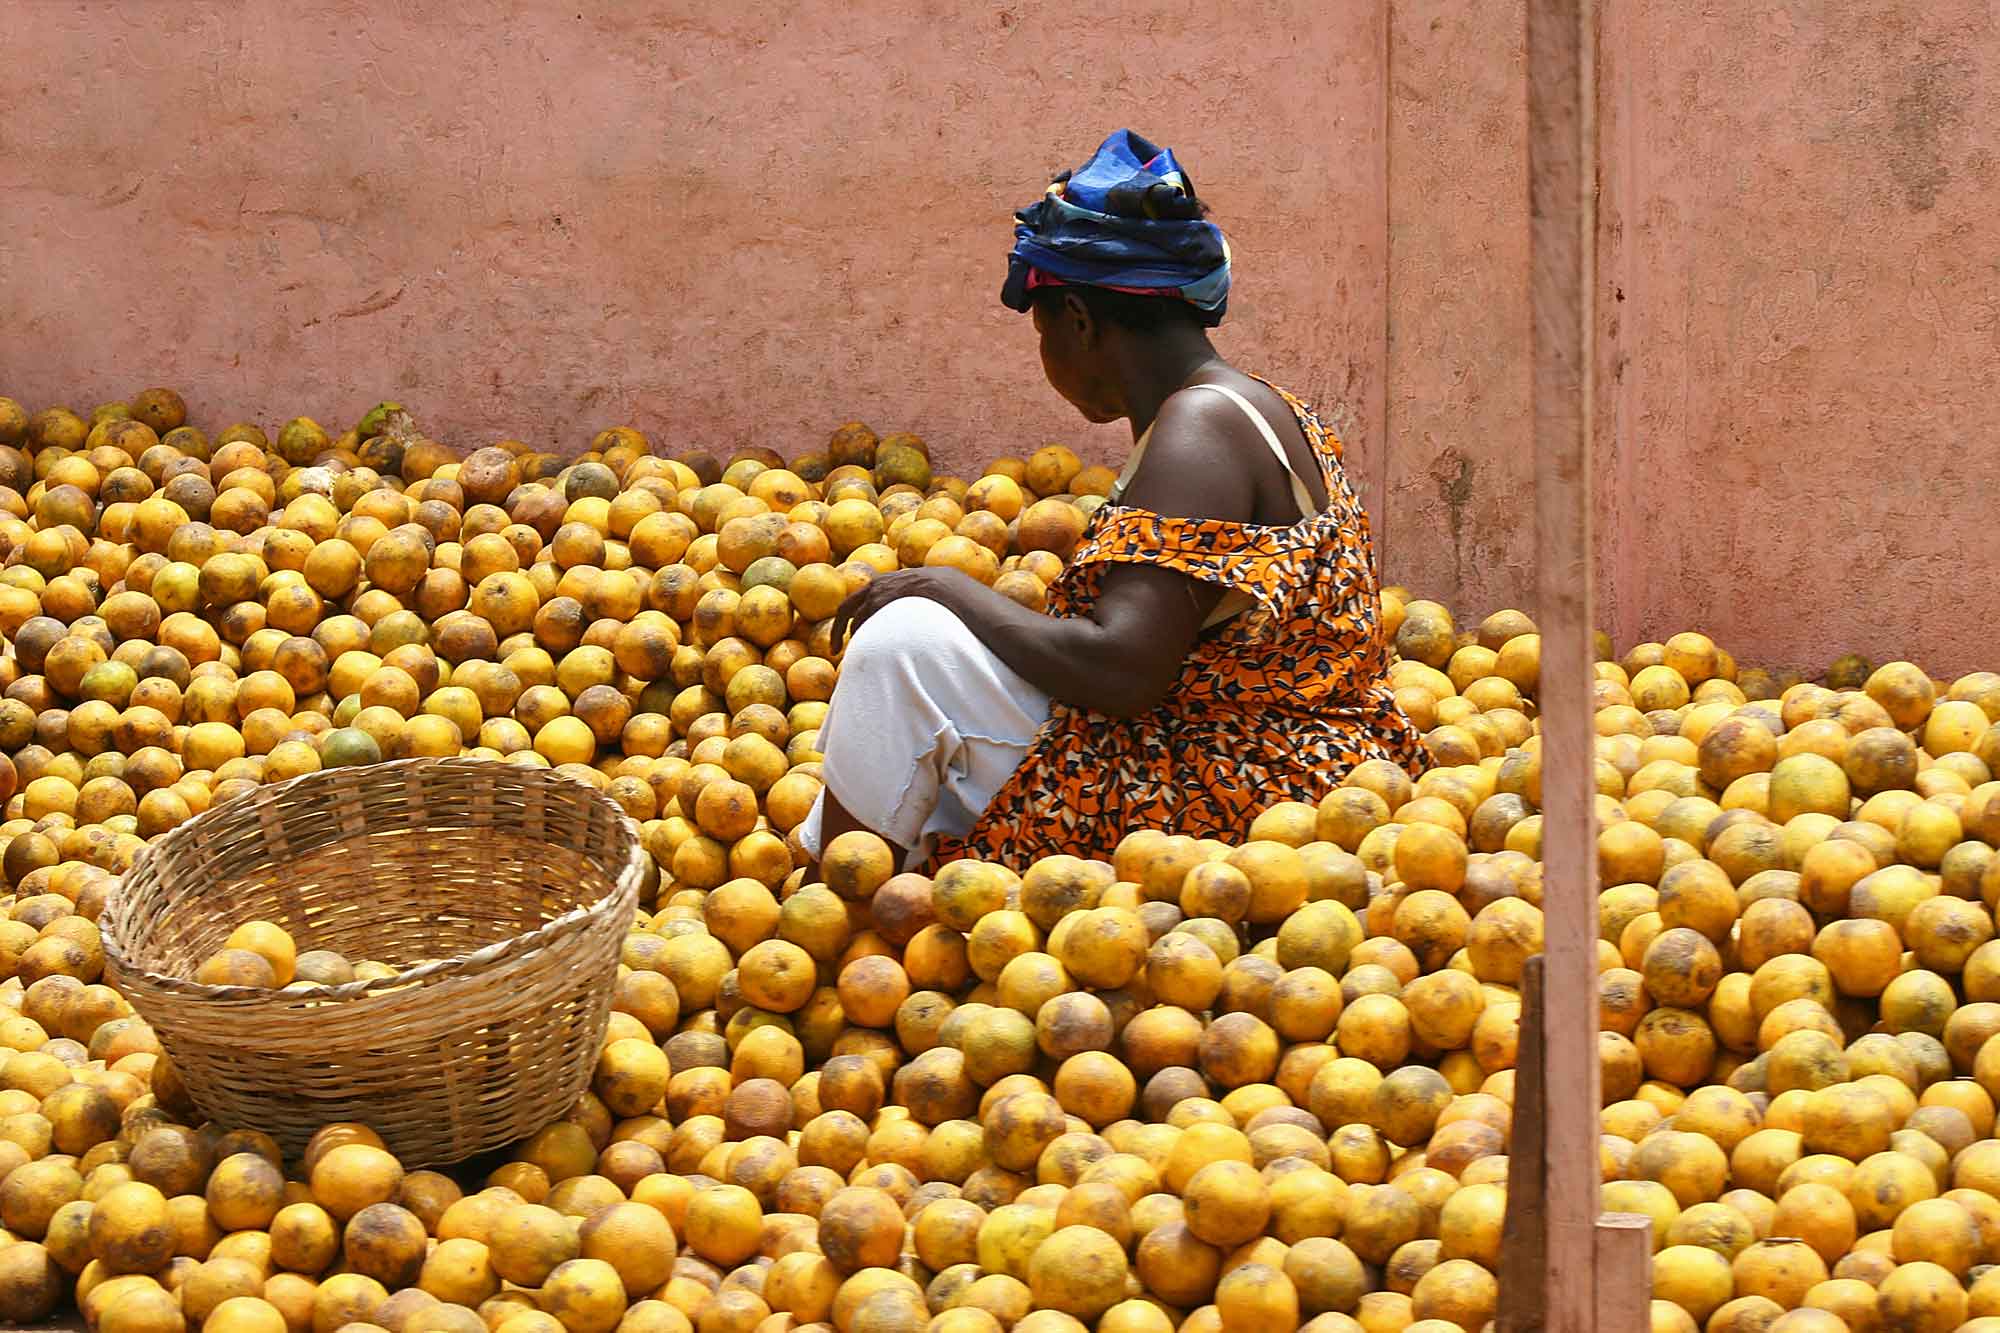 A woman selling oranges at a market in Accra, Ghana. © Ulli Maier & Nisa Maier